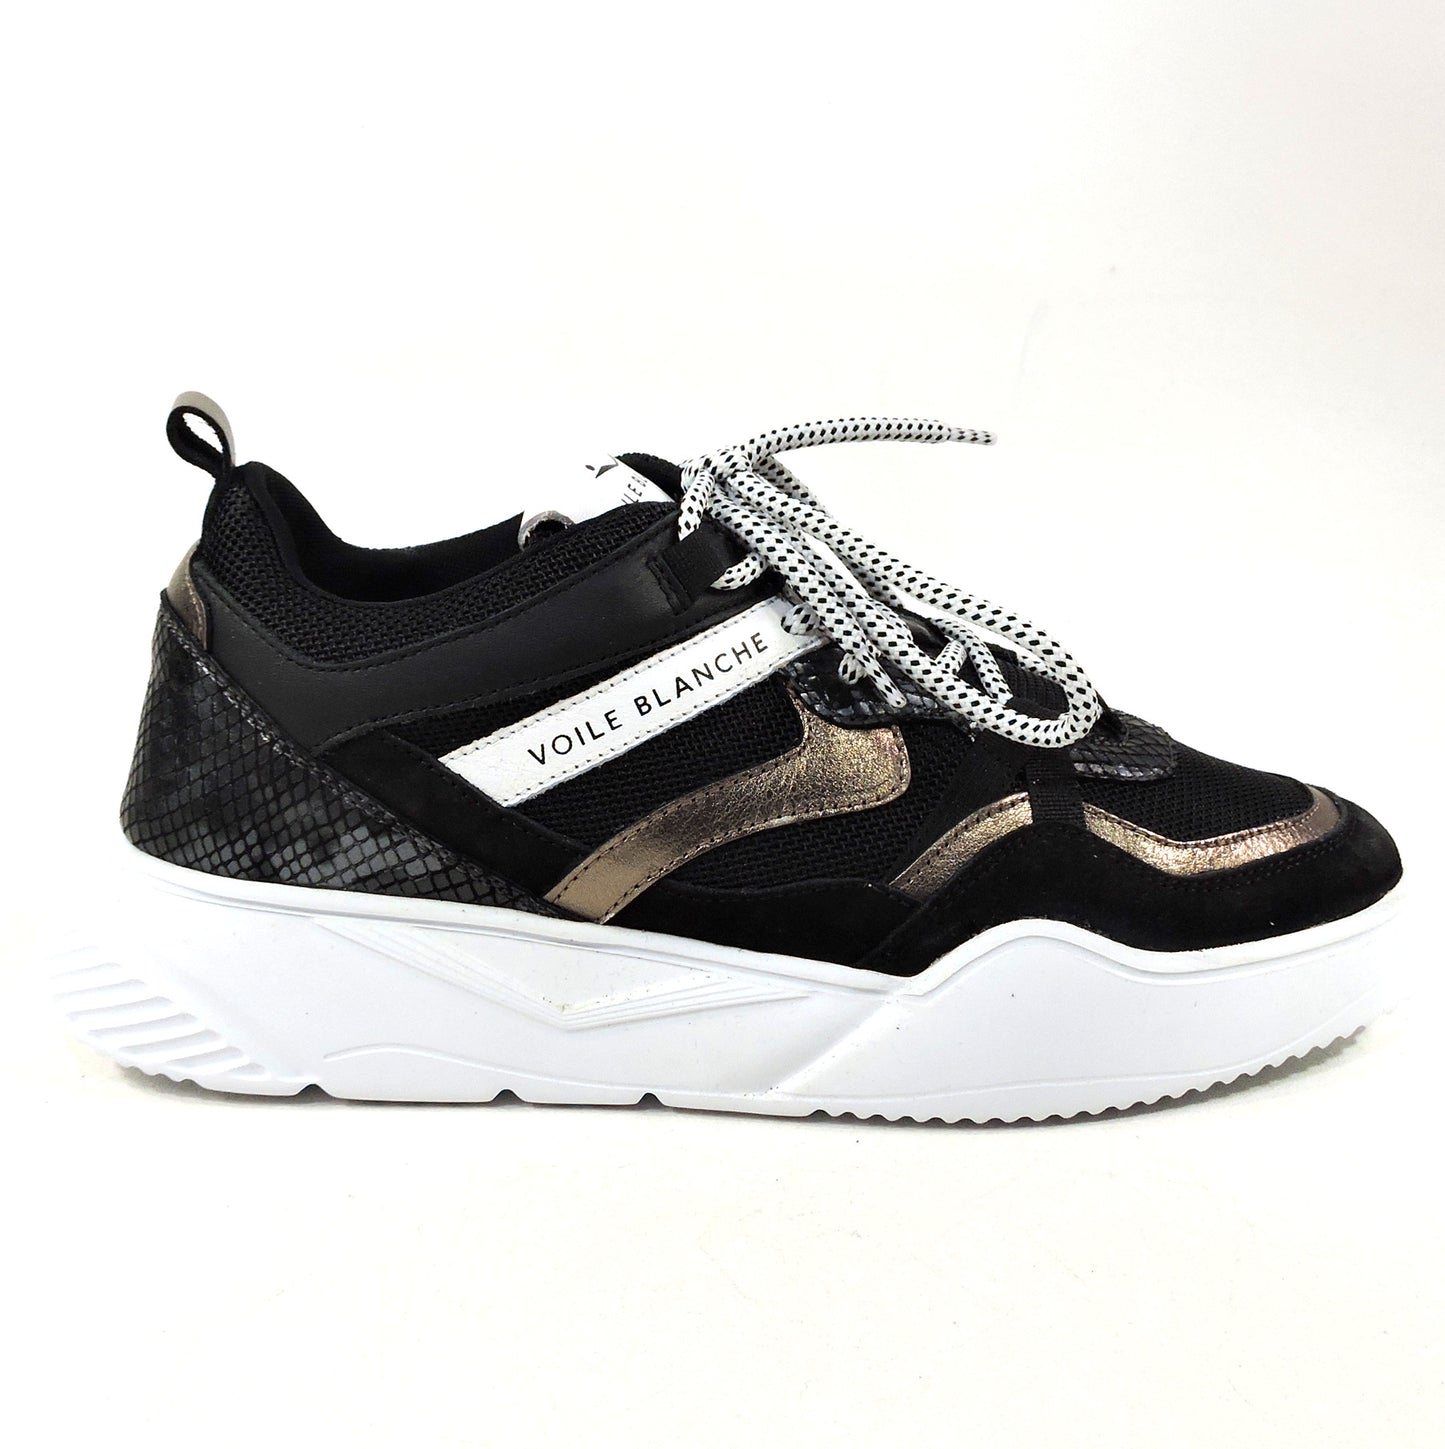 VOILE BLANCHE 🇮🇹 WOMEN'S BLACK LEATHER COMFORT FASHION SNEAKERS